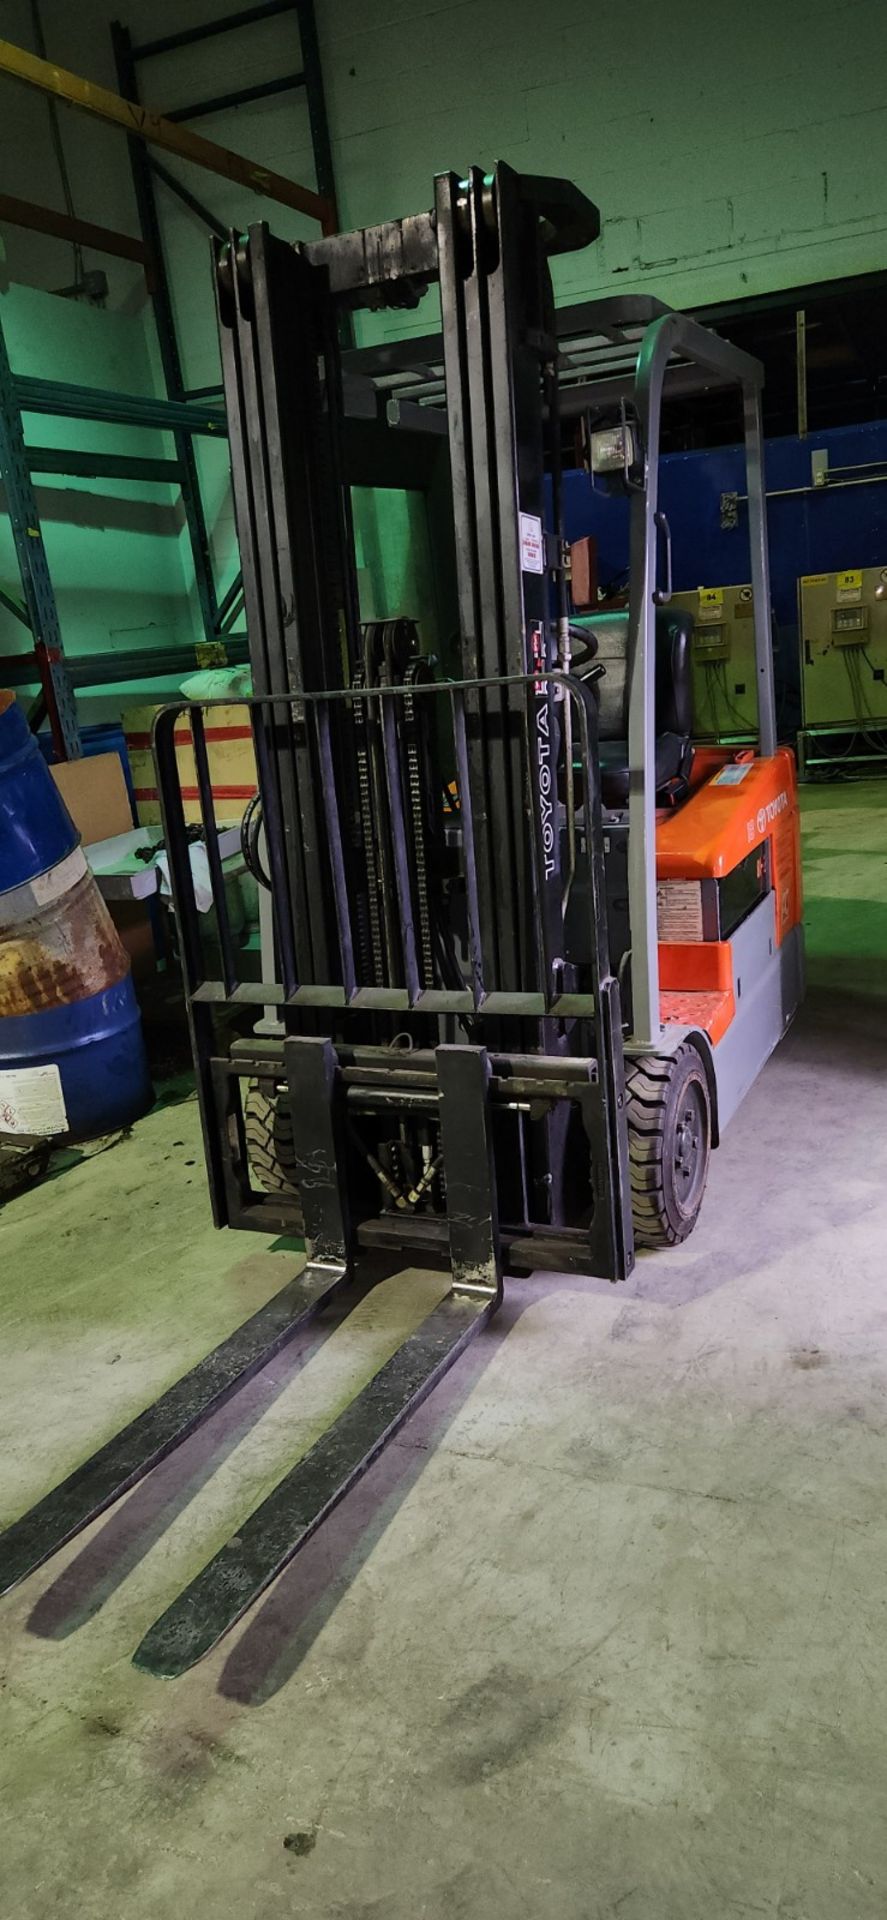 TOYOTA 7FBEU18 ELECTRIC FORKLIFT, S/N 15433, 2,900LB CAP., 189" MAX LIFT, 3-STAGE MAST, SIDE